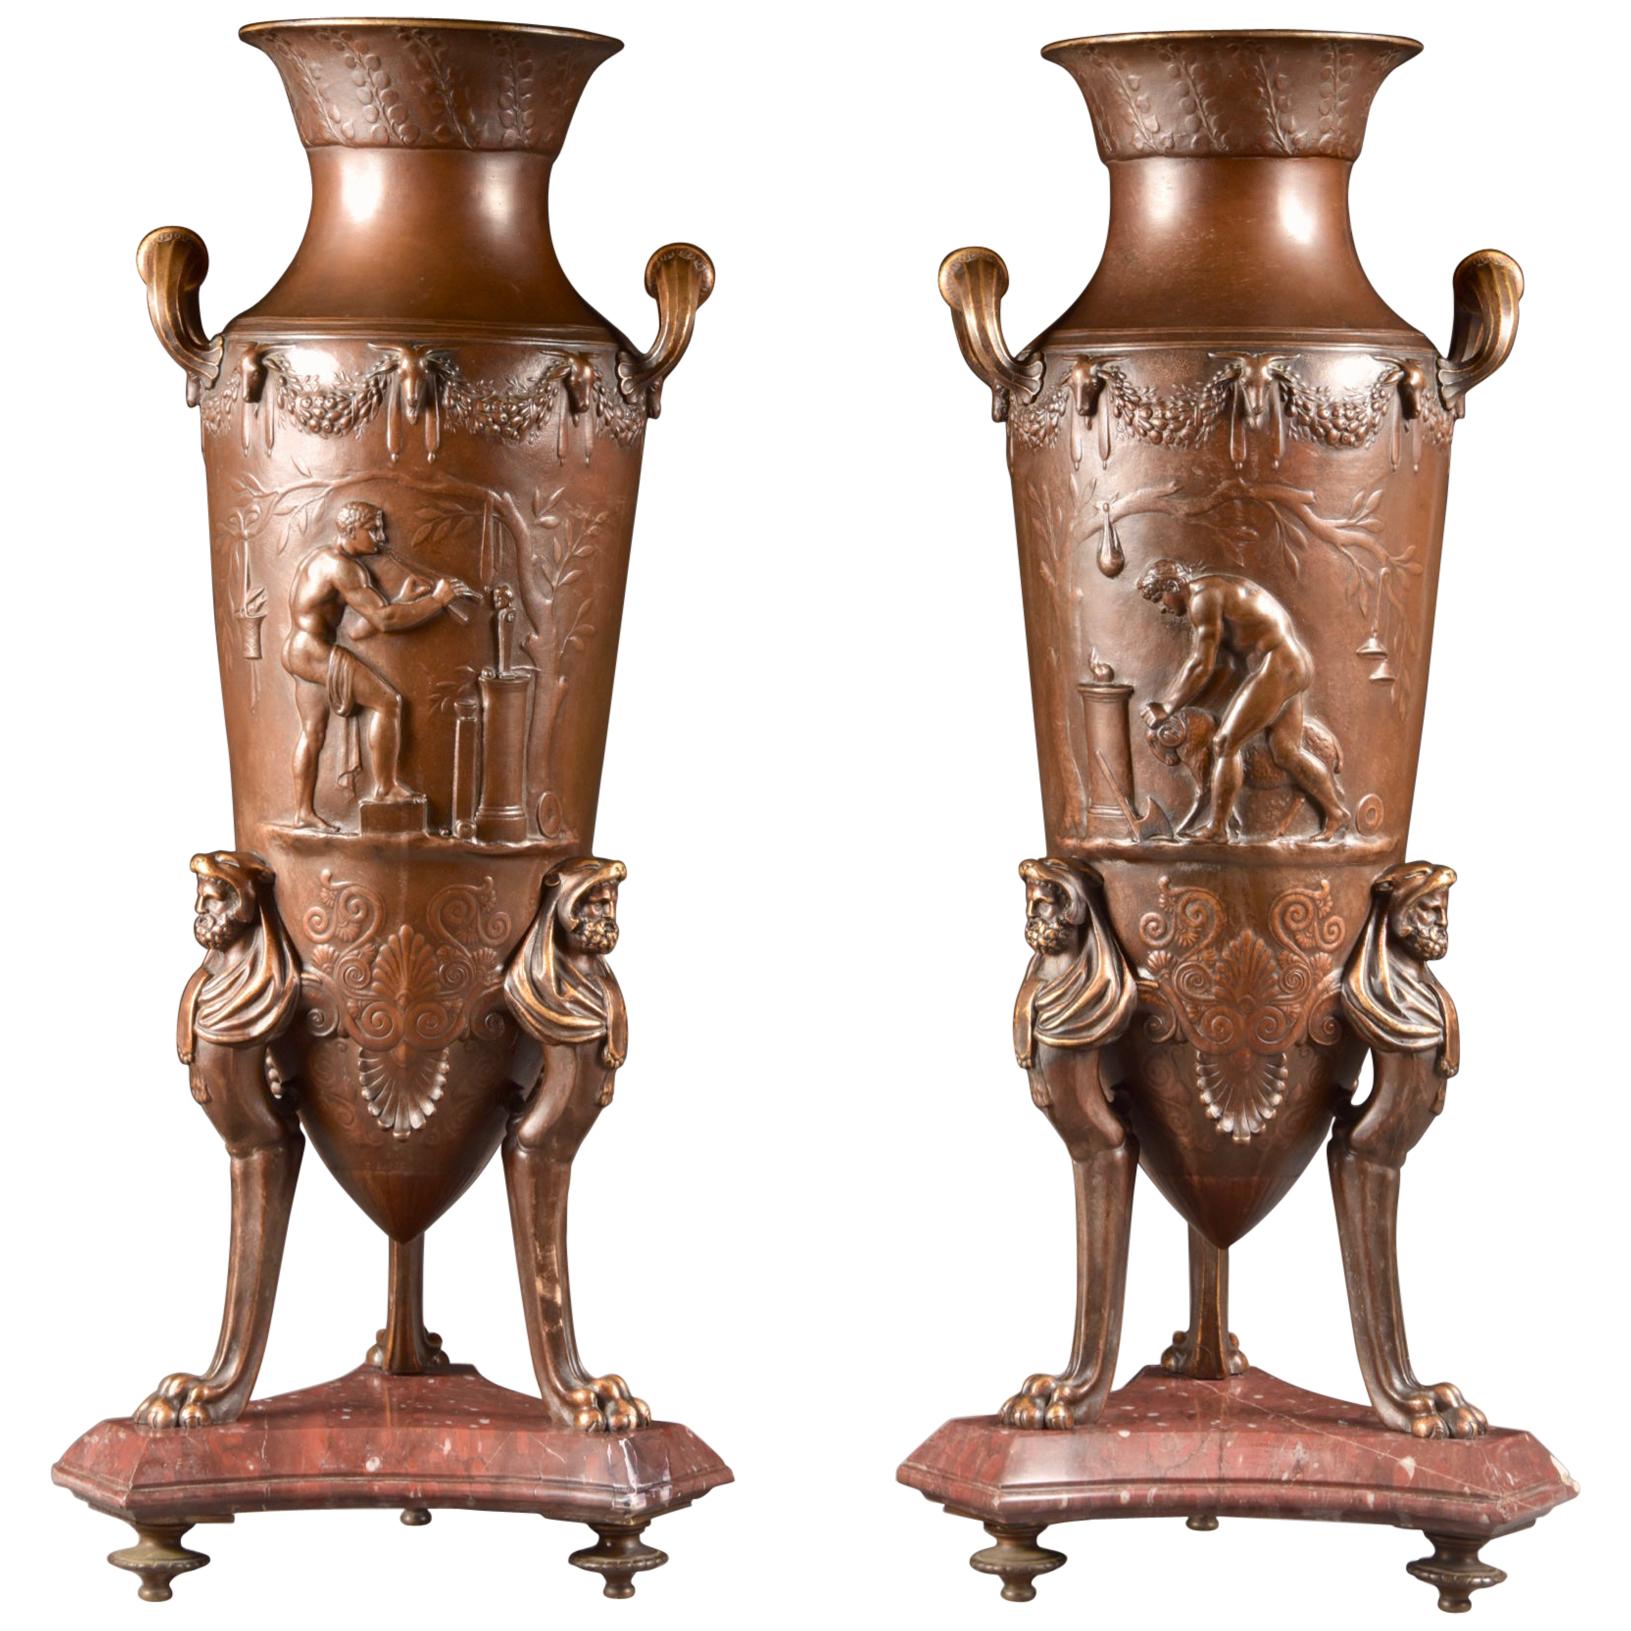 F. Levillain (1837-1905), F. Barbedienne, Foundry, pair Large Neo-Greek Amphora For Sale